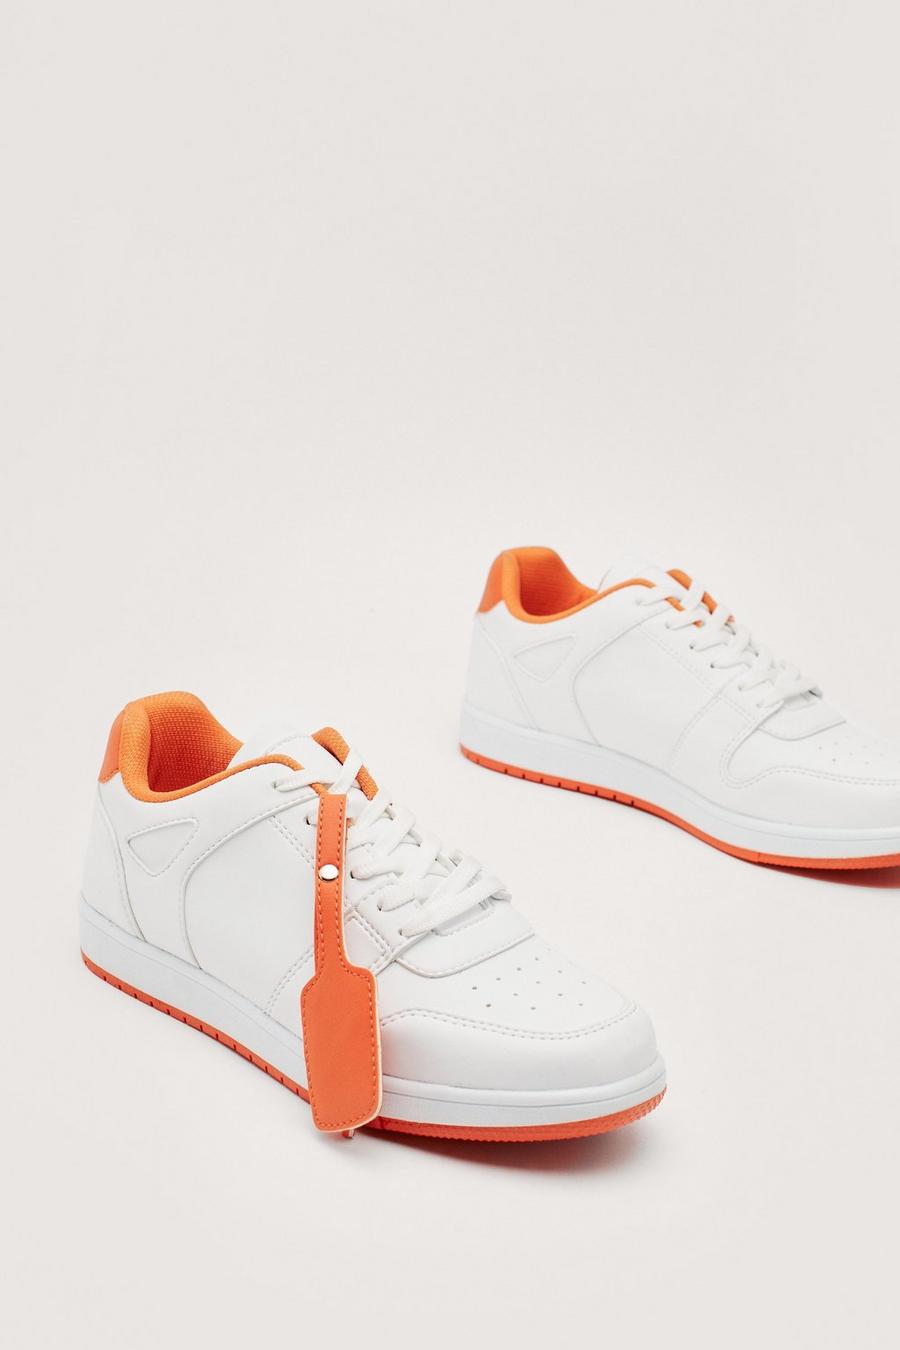 Contrast Tab Lace Up Sneakers